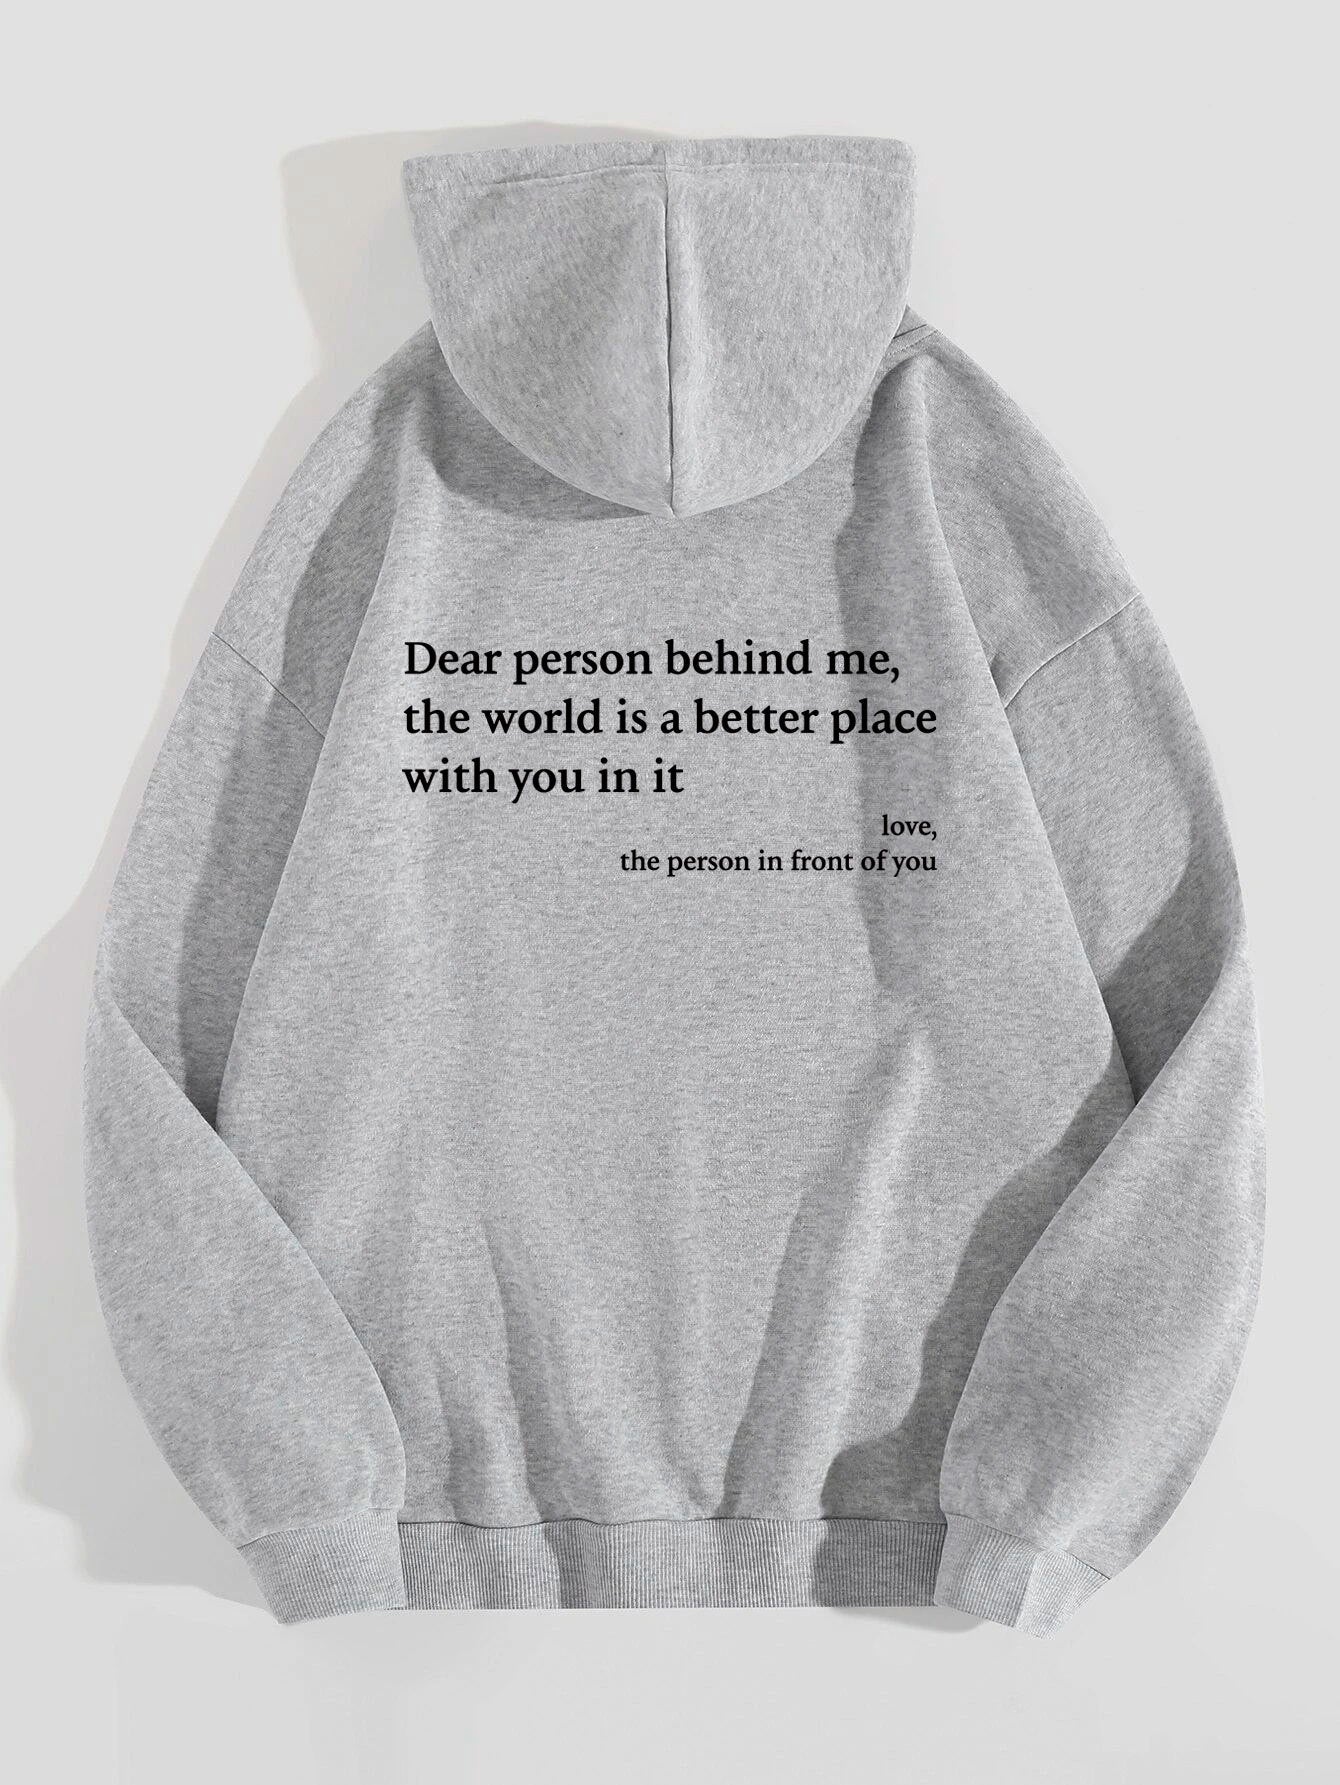 Kindness in Comfort: Plush Letter Printed Hoodie from Eternal Gleams